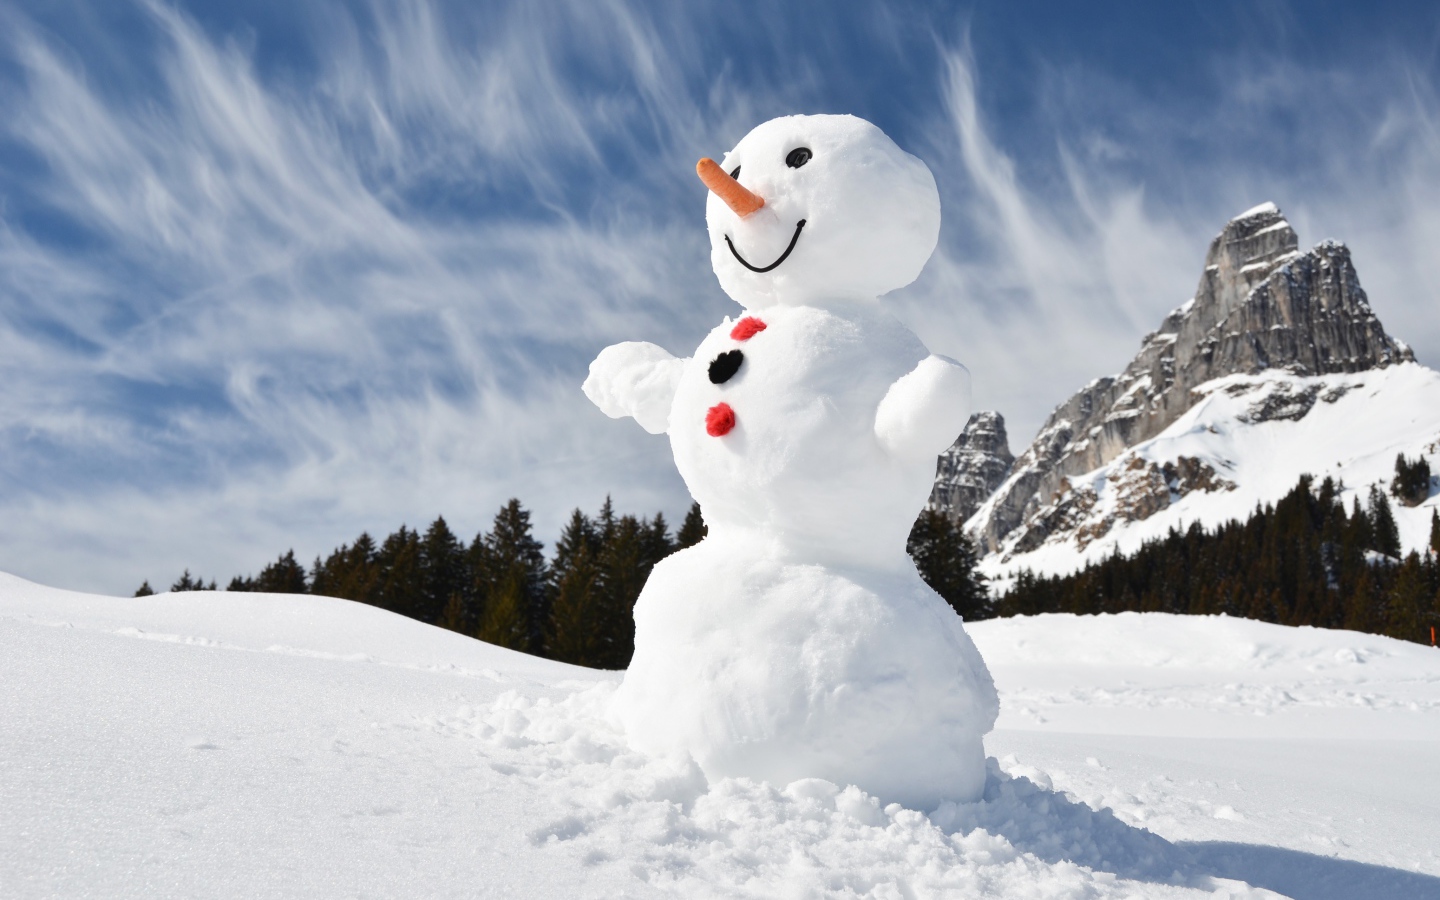 Big snowman in the mountains under the blue sky